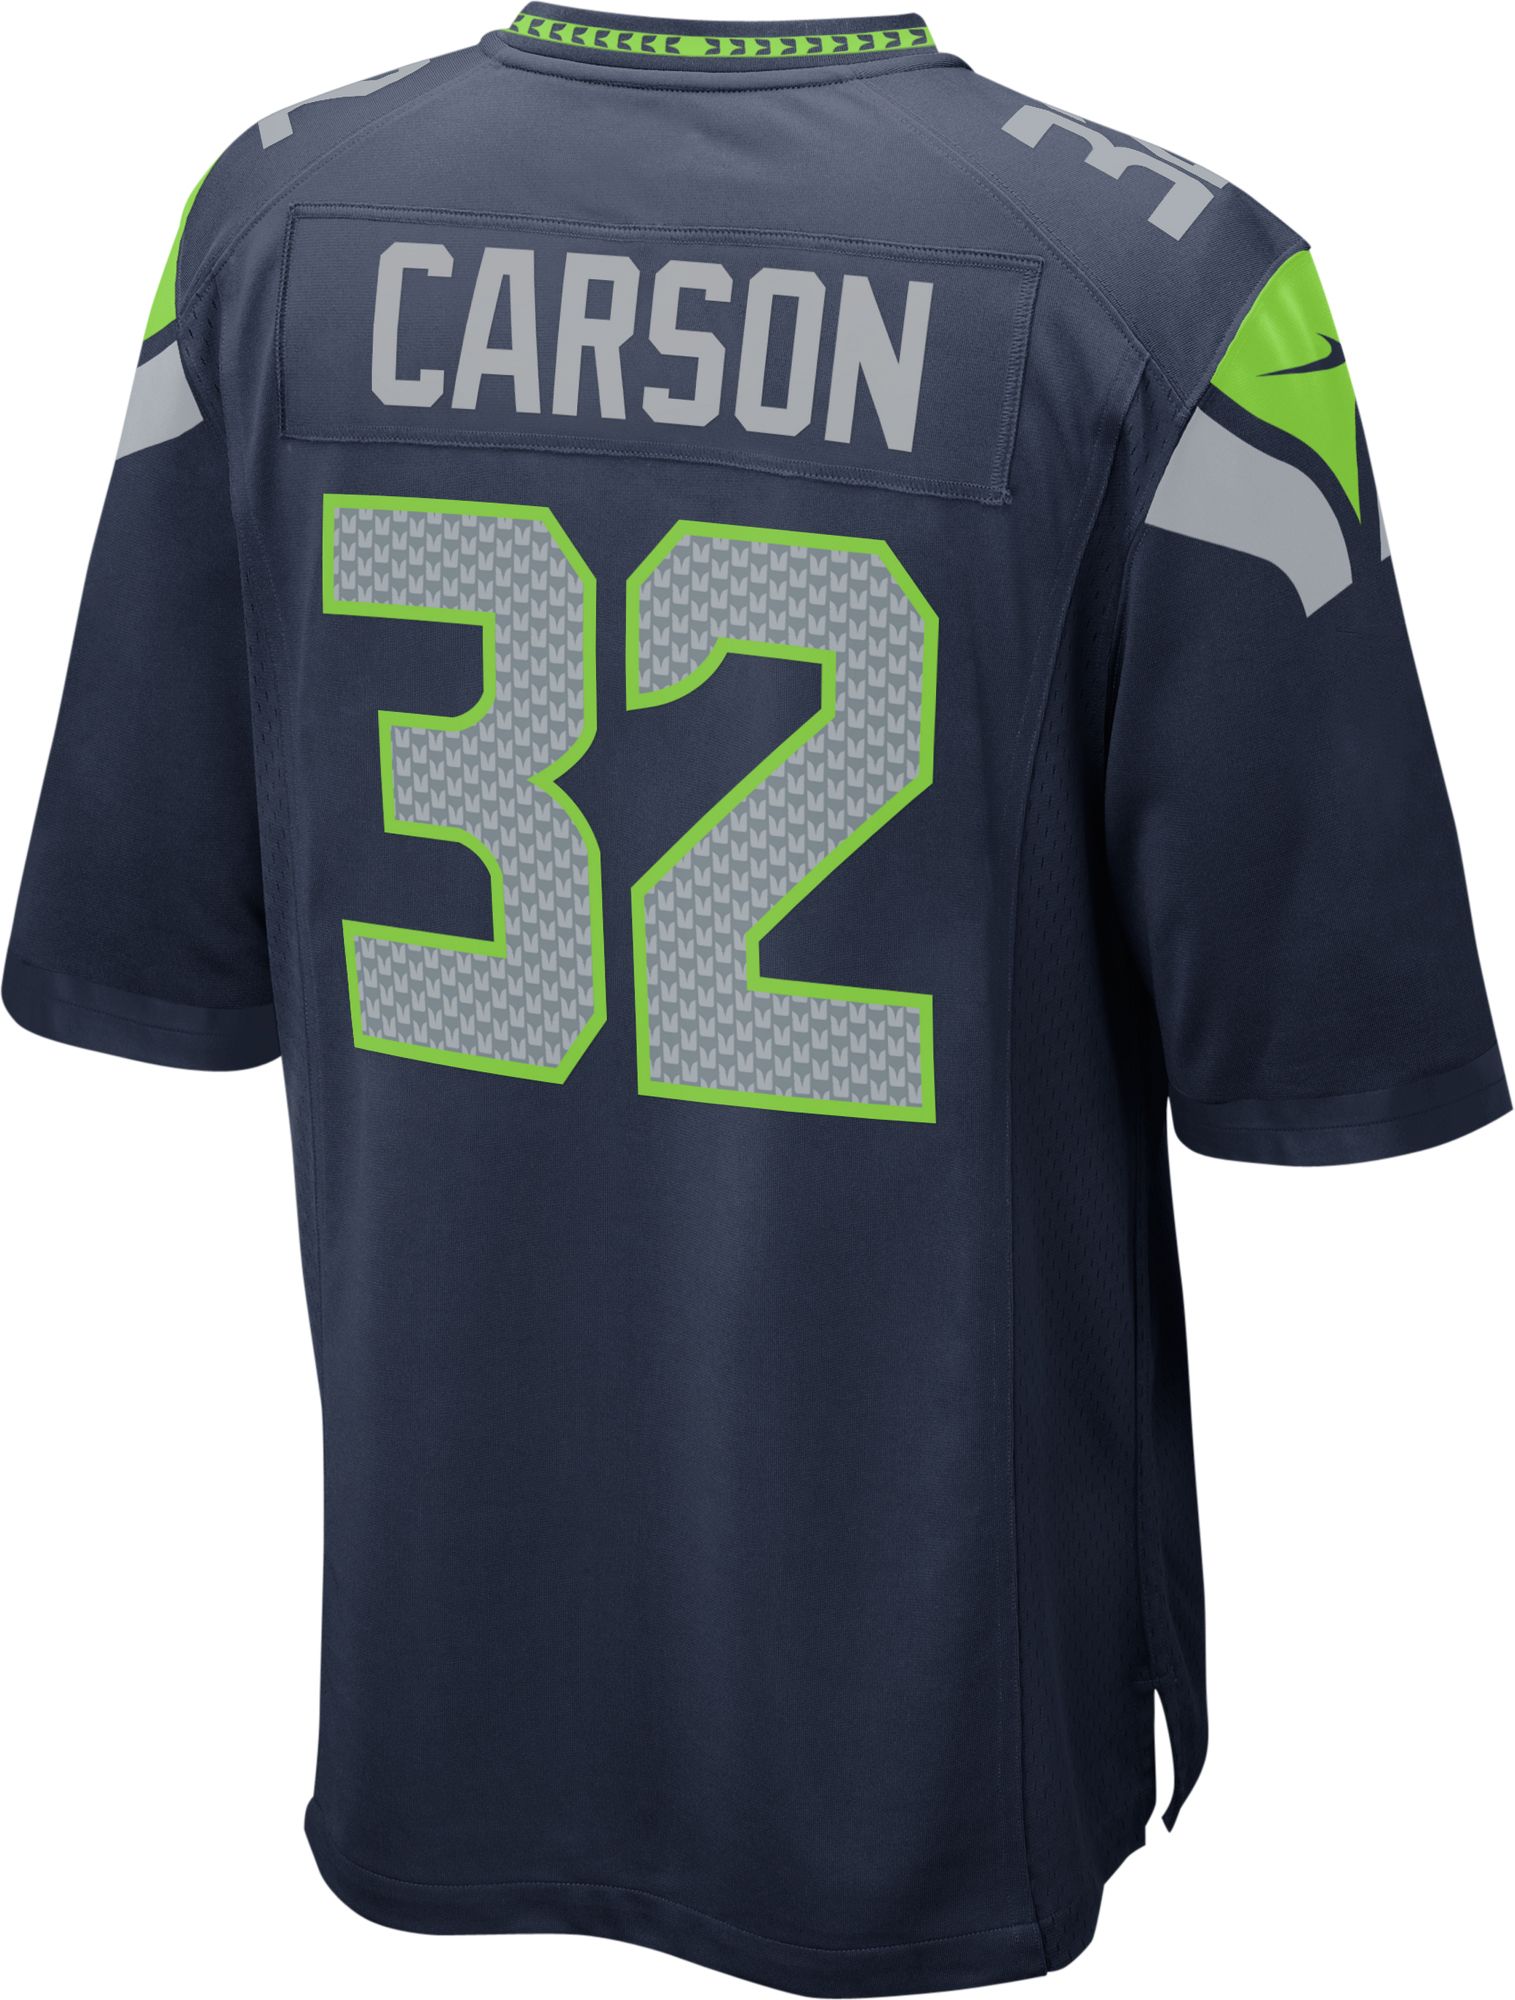 chris carson jersey number